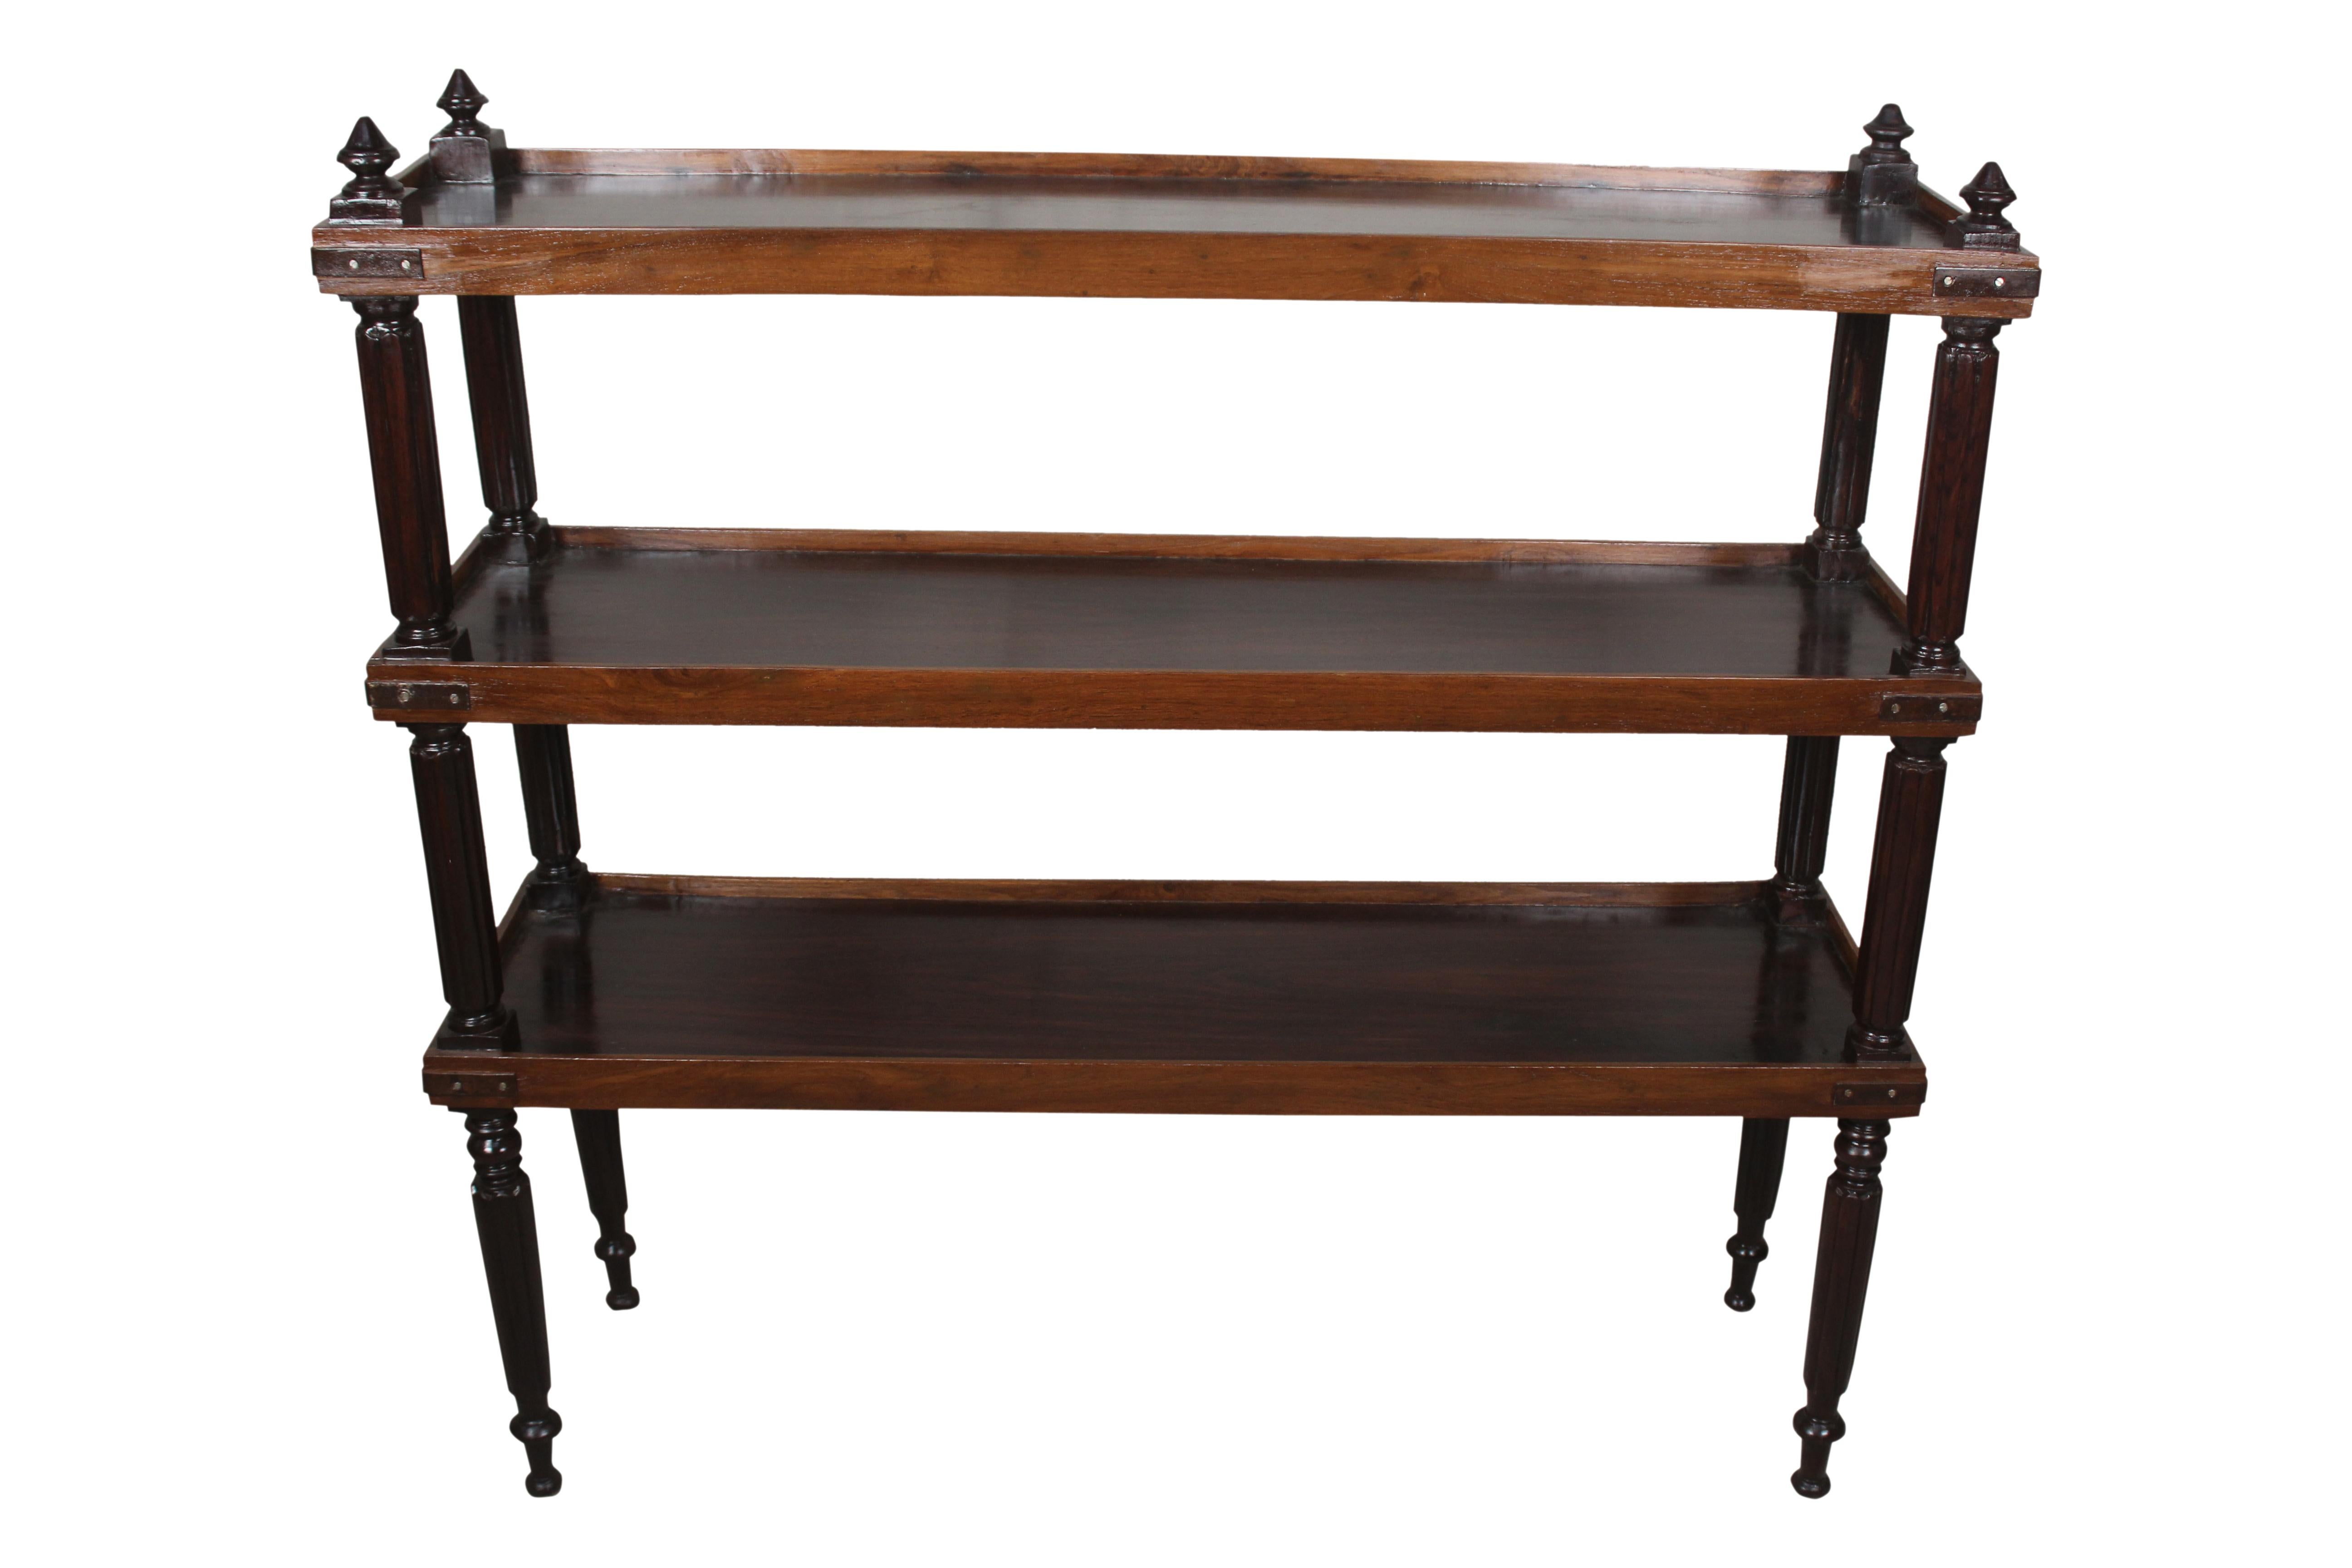 A rosewood bookcase shelf or étagère with mahogany raised borders which create a secure lip around the edges. Features include iron strap corners, beveled side supports and turned feet. Colonial British, 1940s.